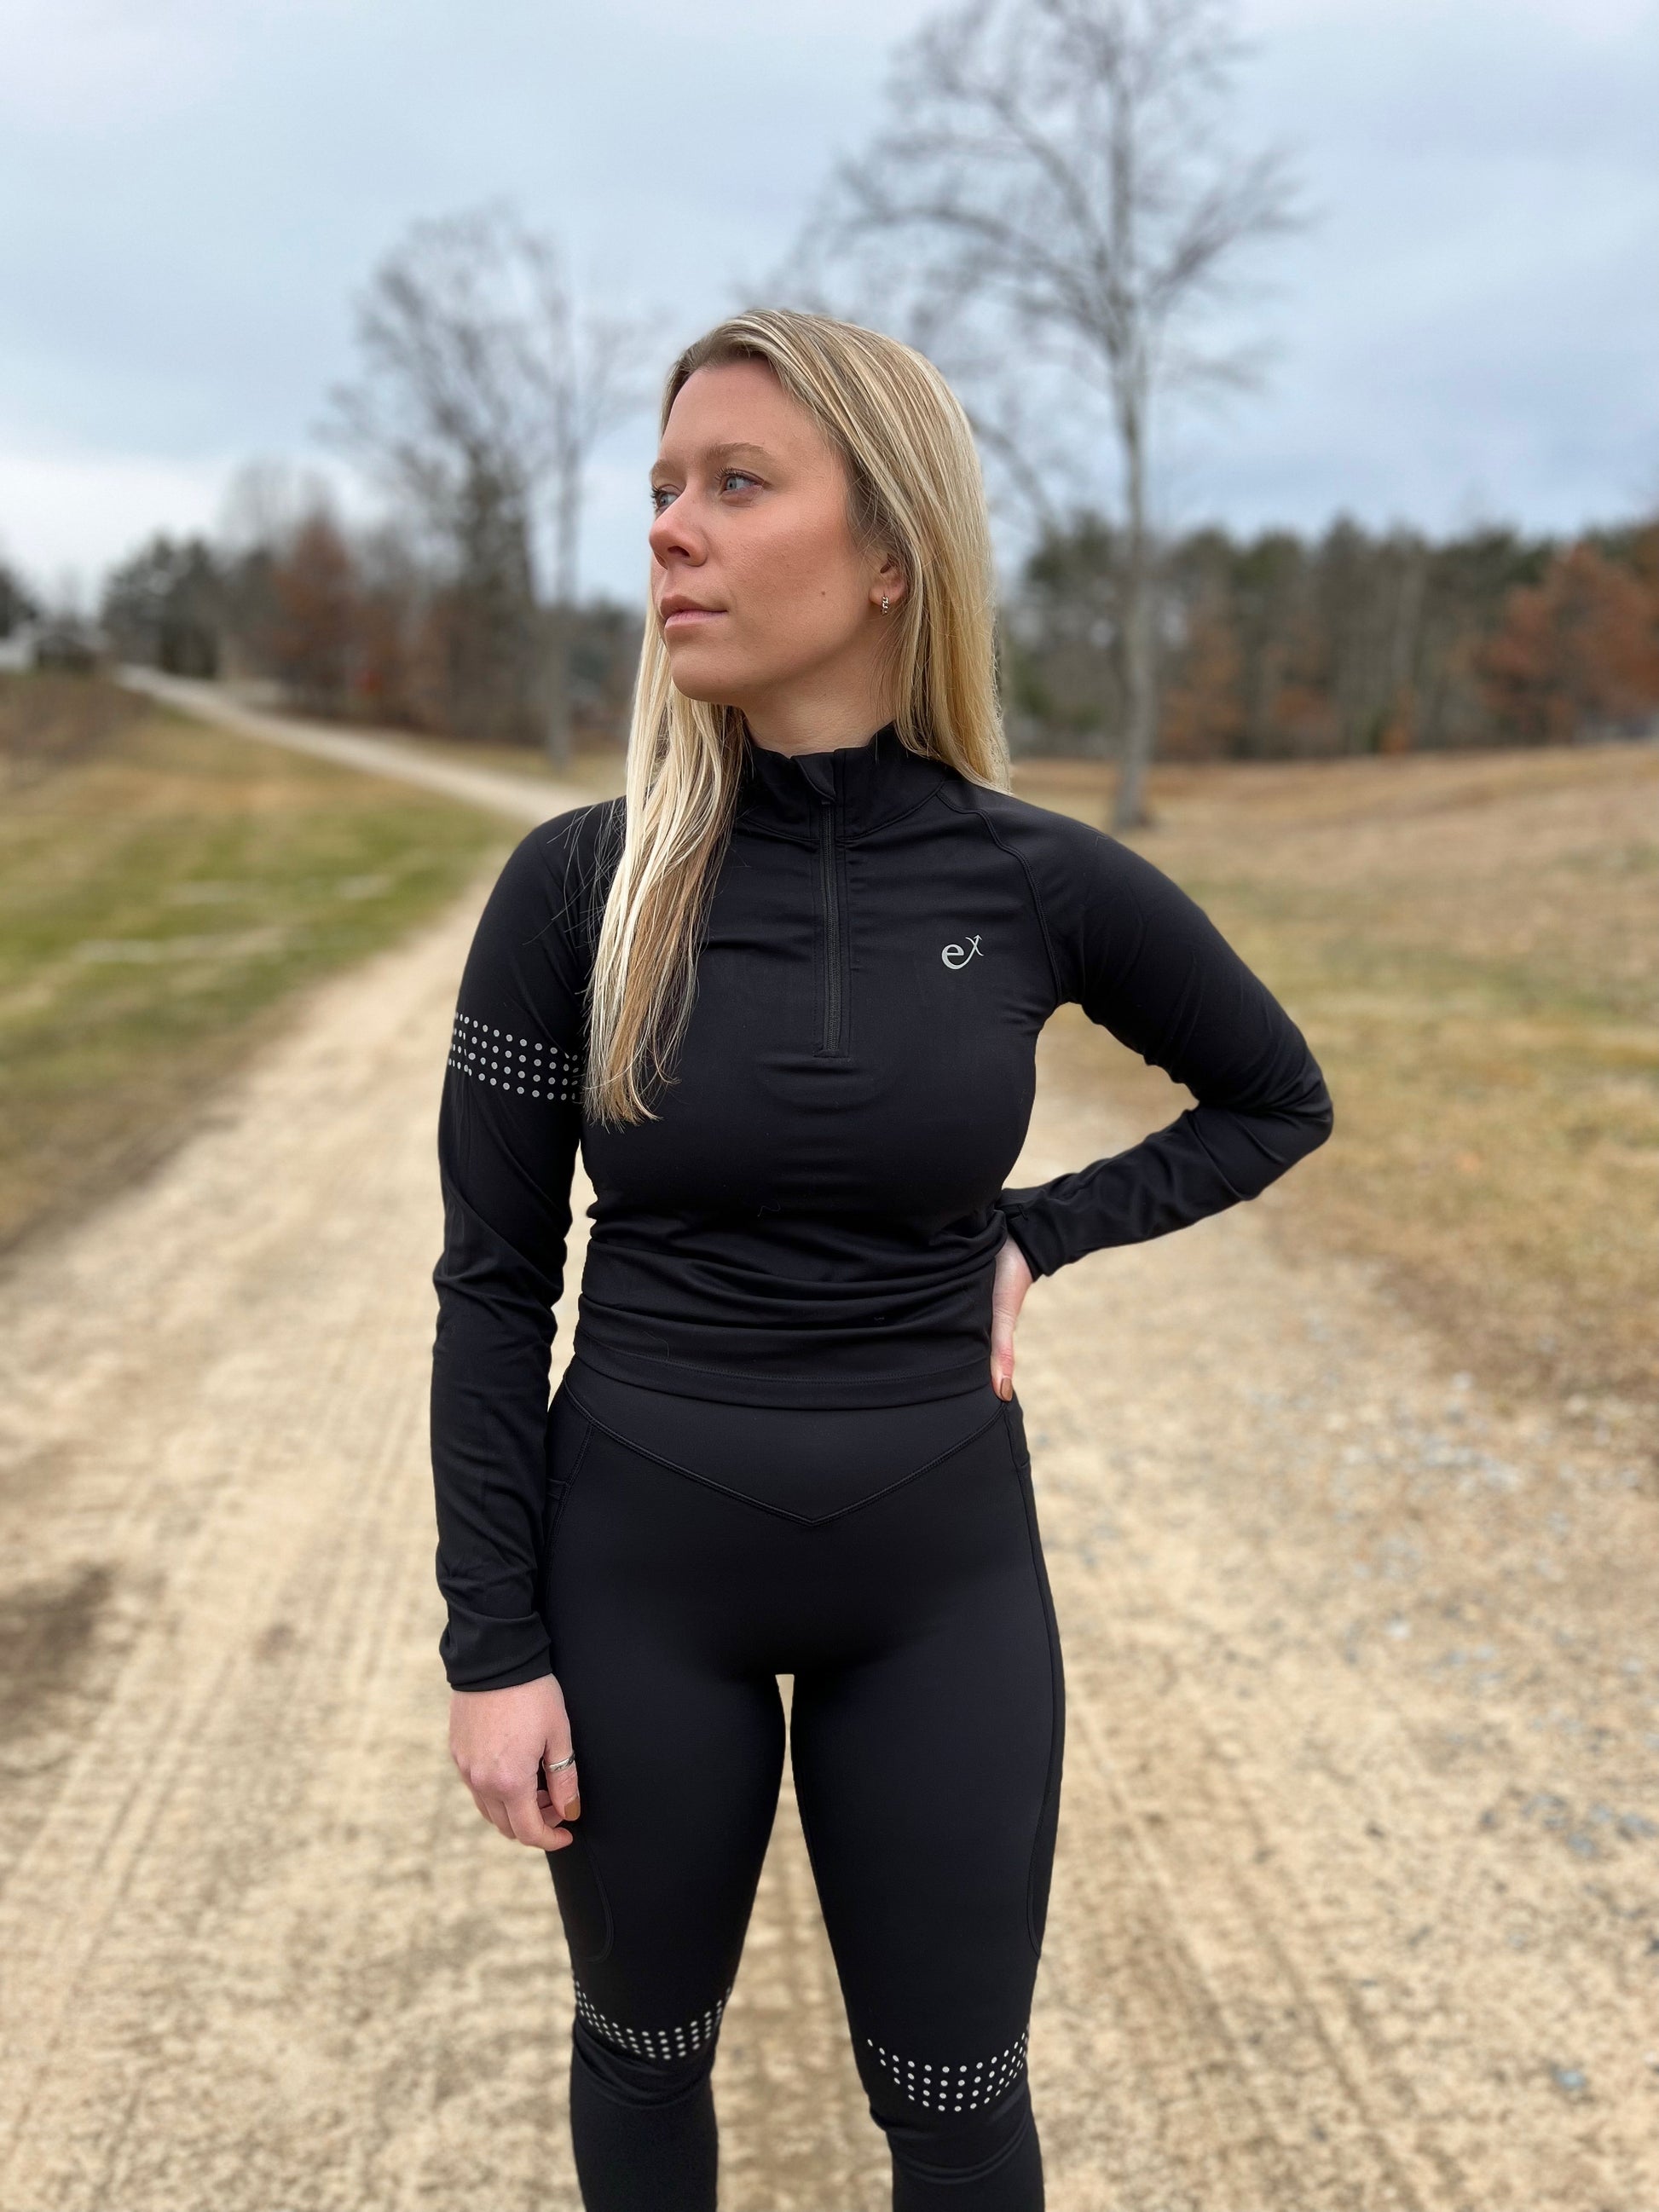 Winter running quarter zip with reflective designs so you are seen at night while running. Soft, durable, and functional all in one top. 